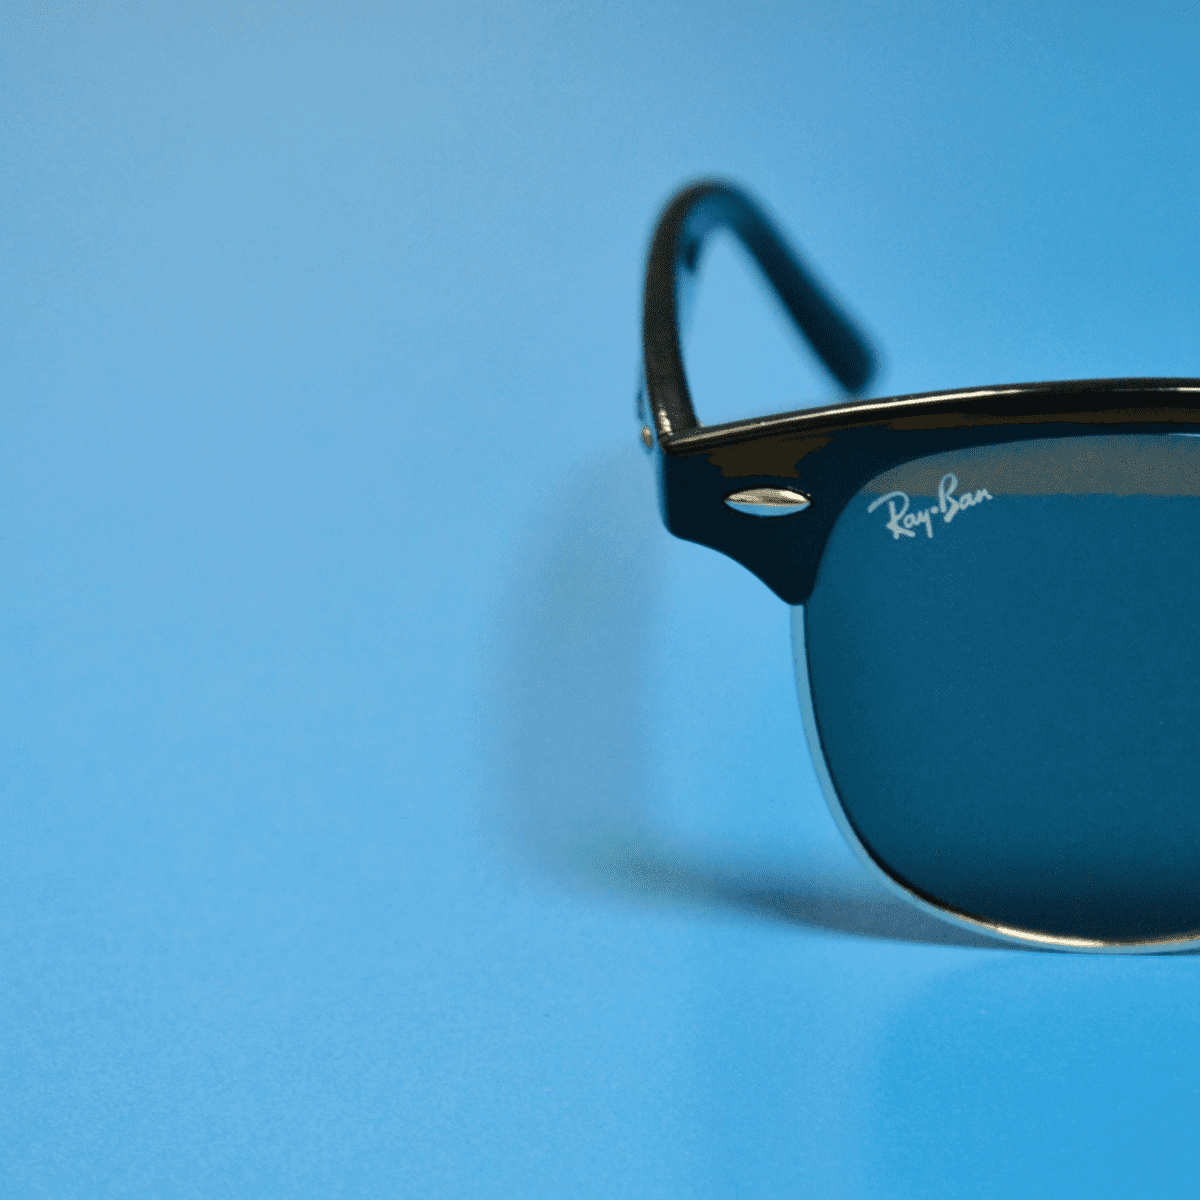 How to Remove a Scratch from Ray-ban Sunglasses?